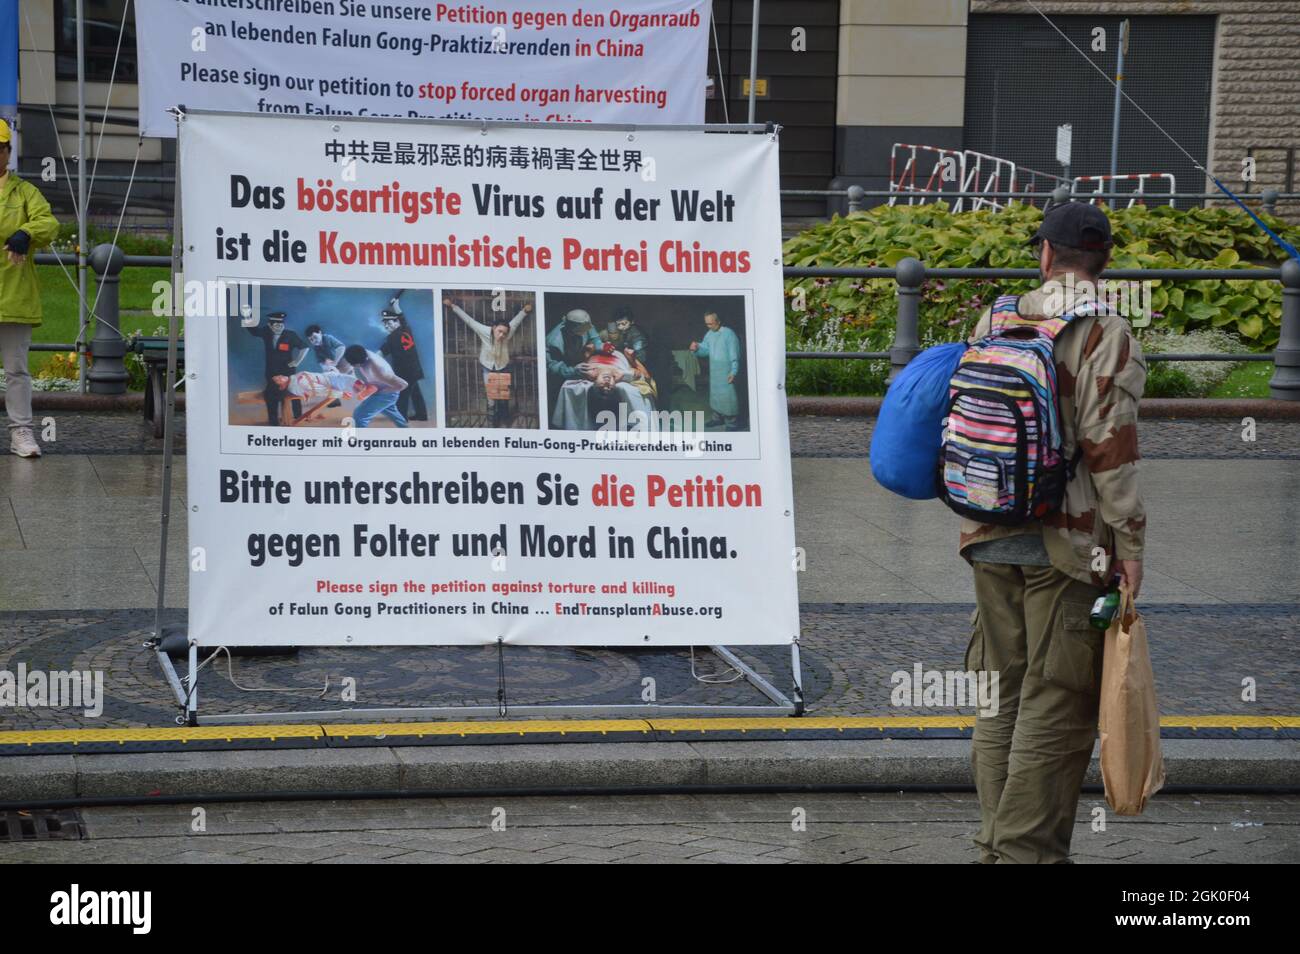 Falun Gong performance and demonstration at Pariser Platz square in Berlin, Germany - September 11, 2021. Stock Photo